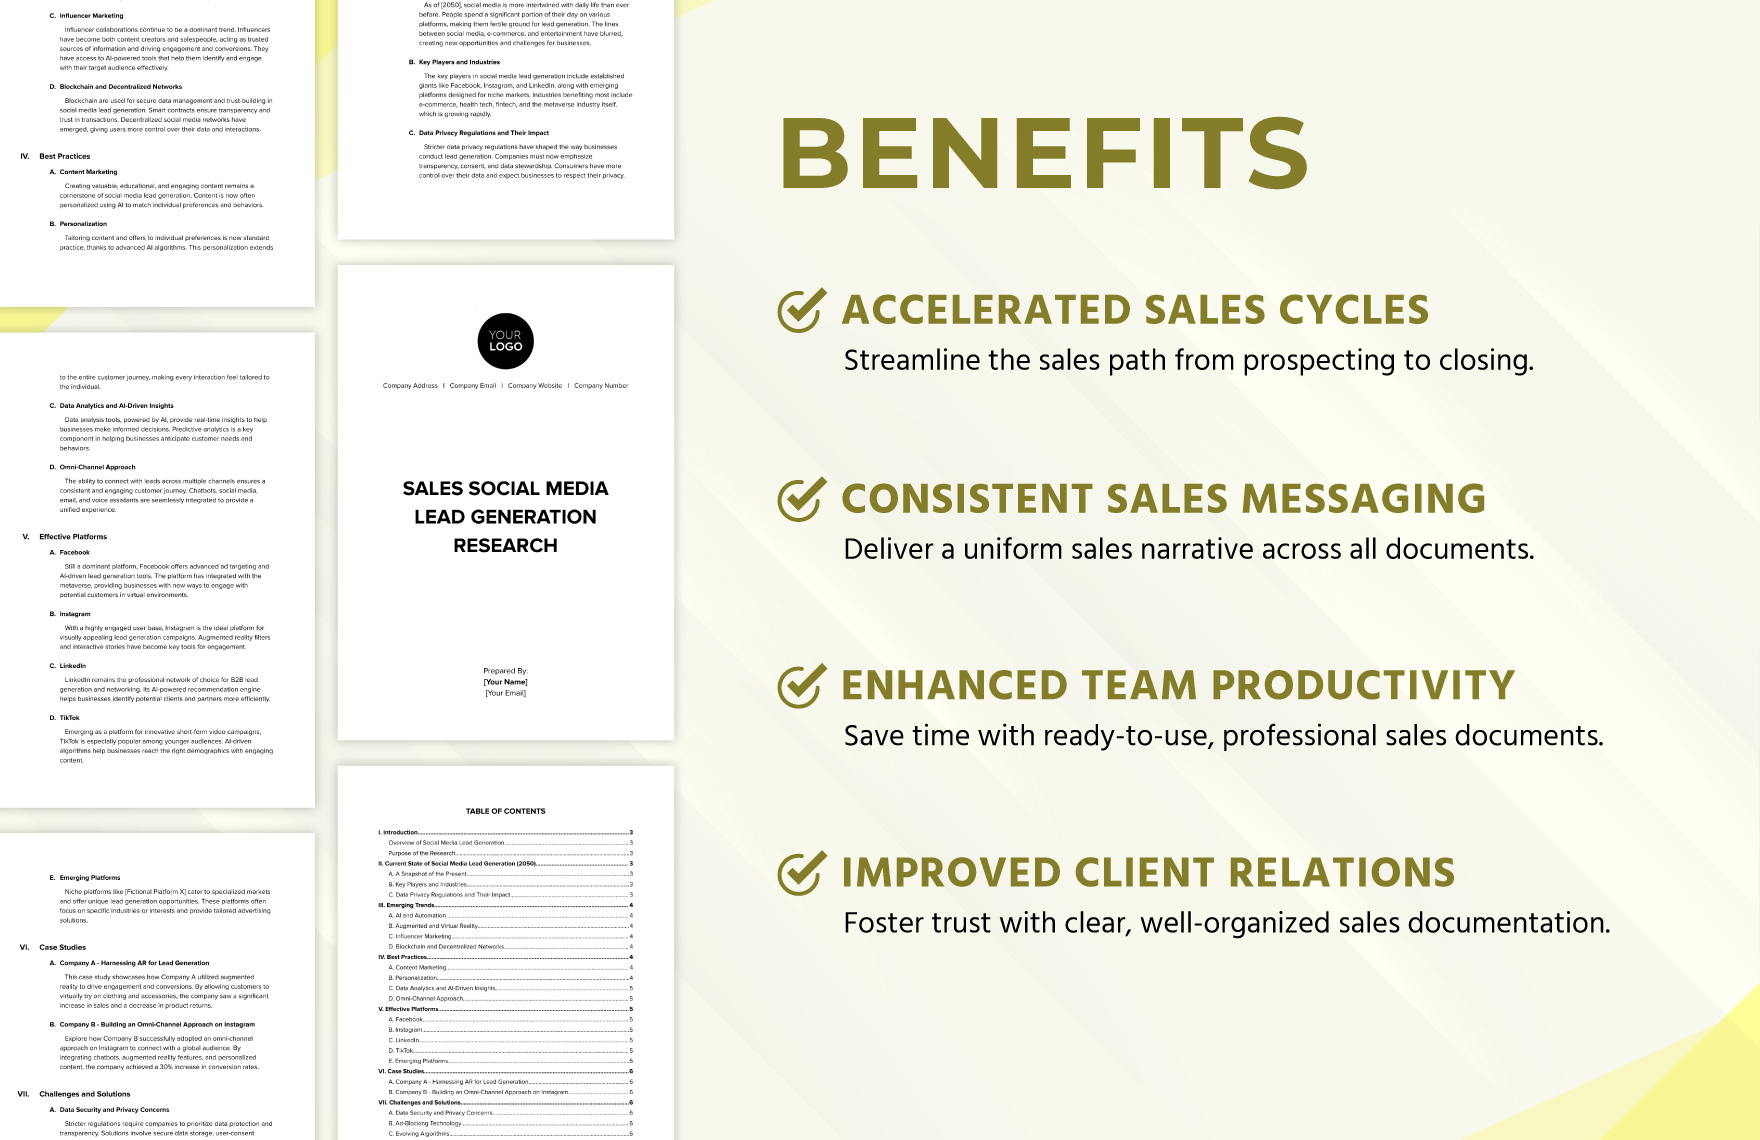 Sales Social Media Lead Generation Research Template